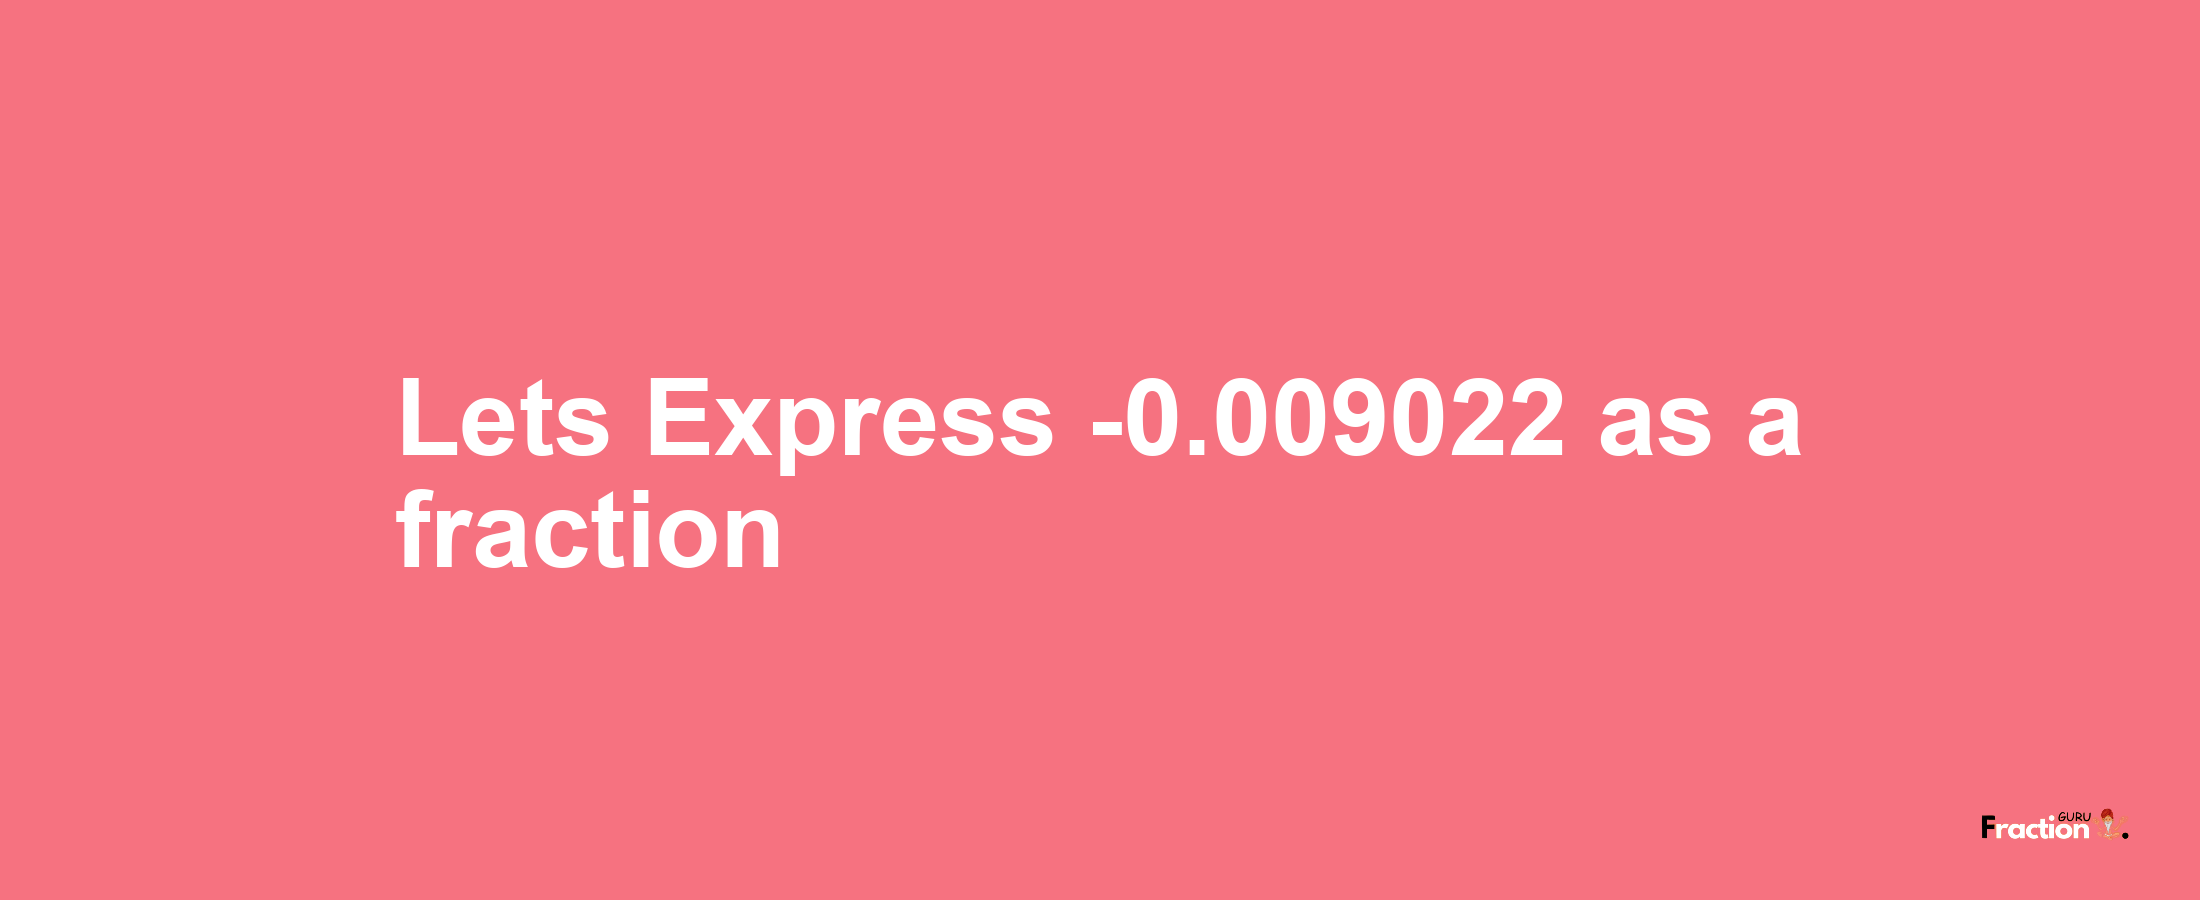 Lets Express -0.009022 as afraction